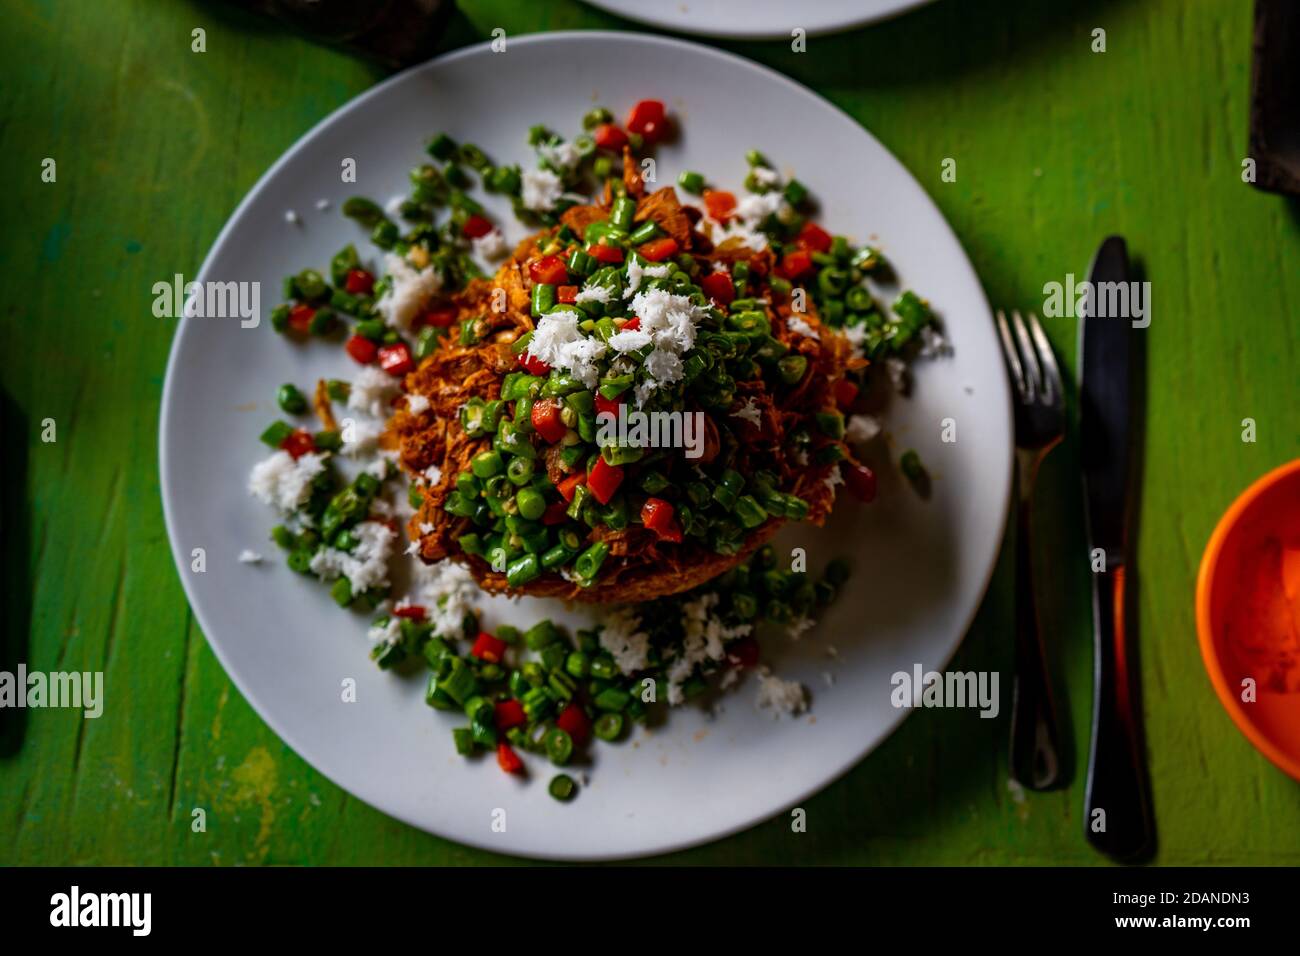 indonesian dish rice with vegetables Stock Photo